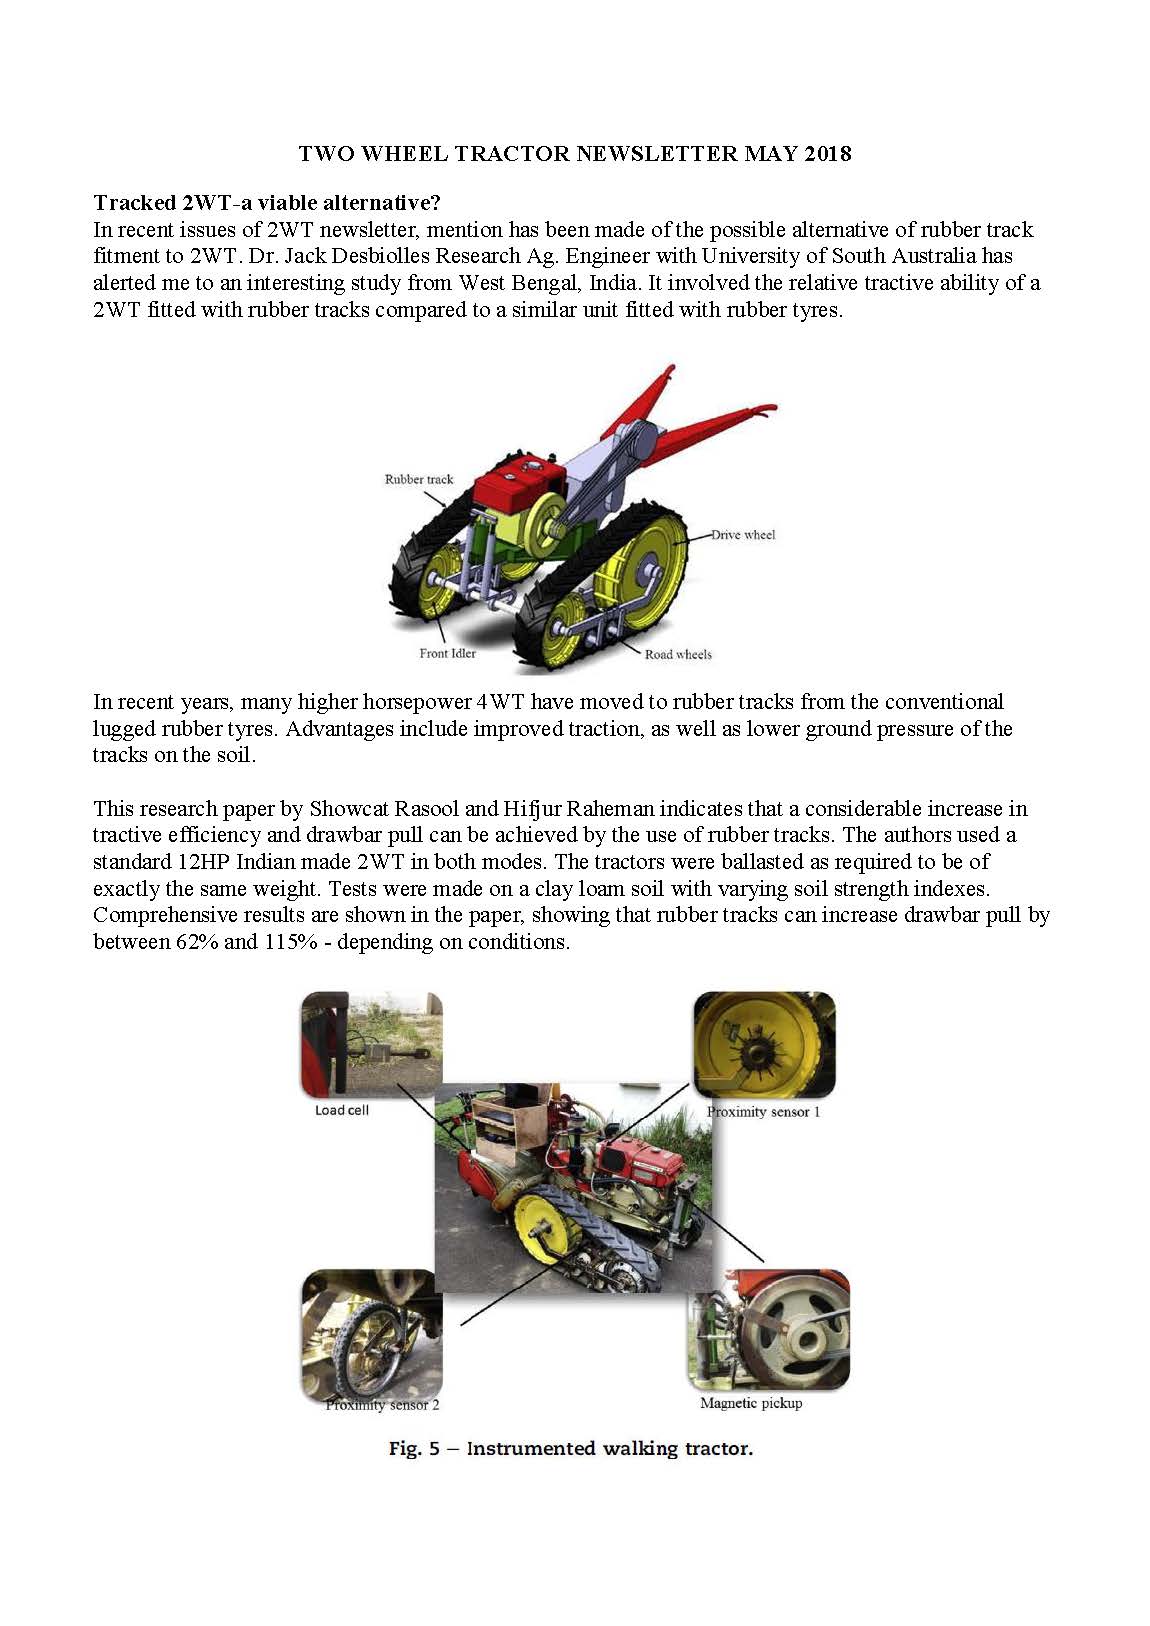  May 2018 Two Wheel Tractor Newsletter